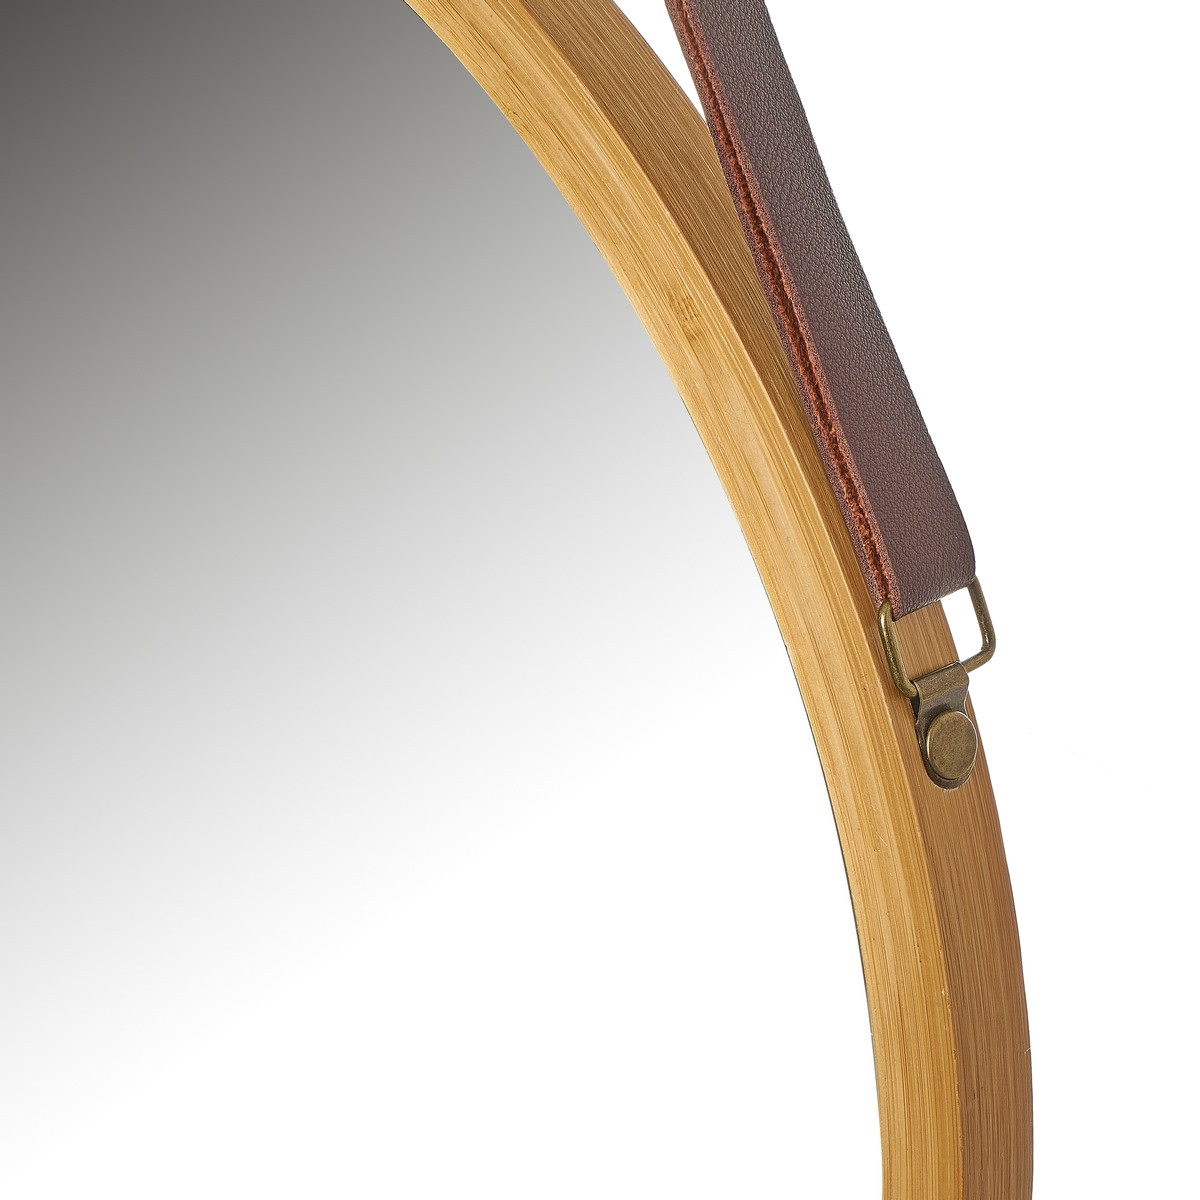 Hanging Round Wall Mirror (38 cm) (Solid Bamboo Frame)